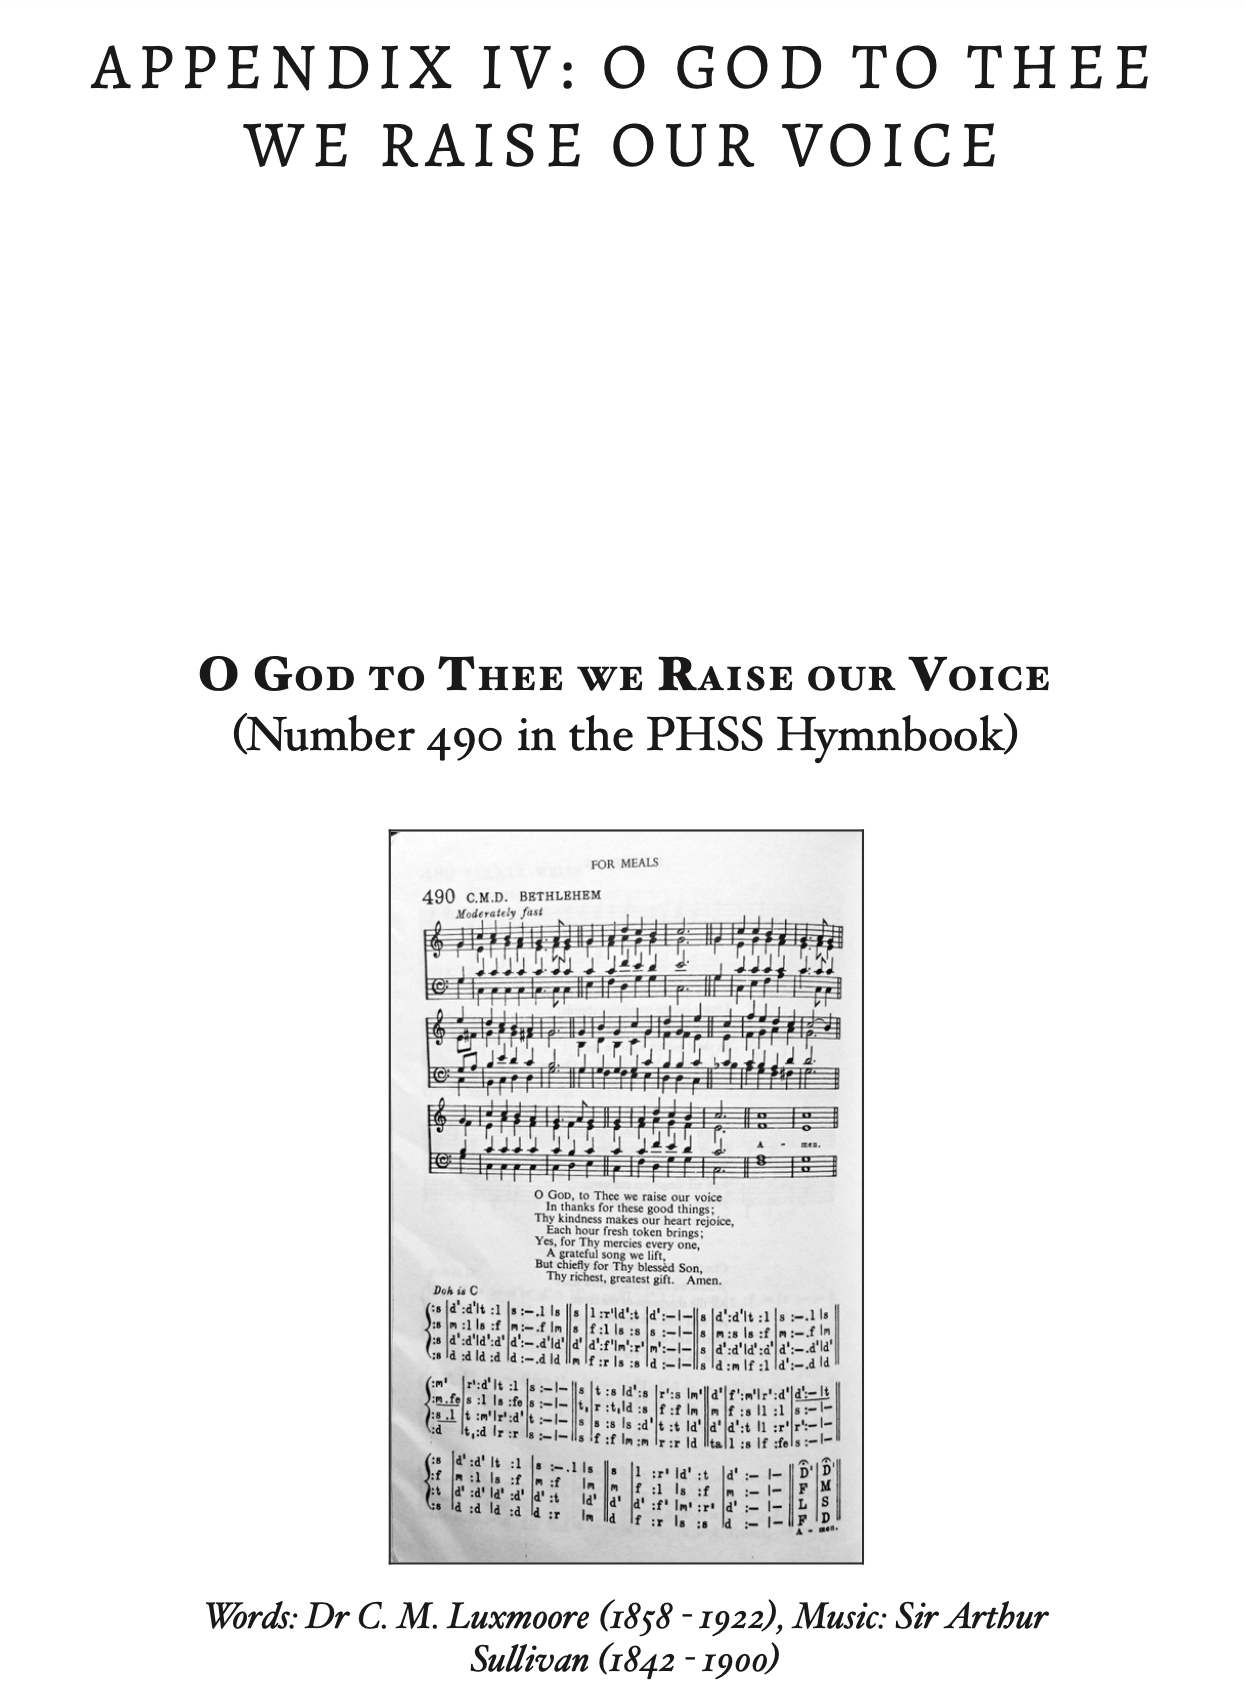 facsimile of words and music, no 490 in PHSS Hymnbook, "O God to Thee we raise our voice"